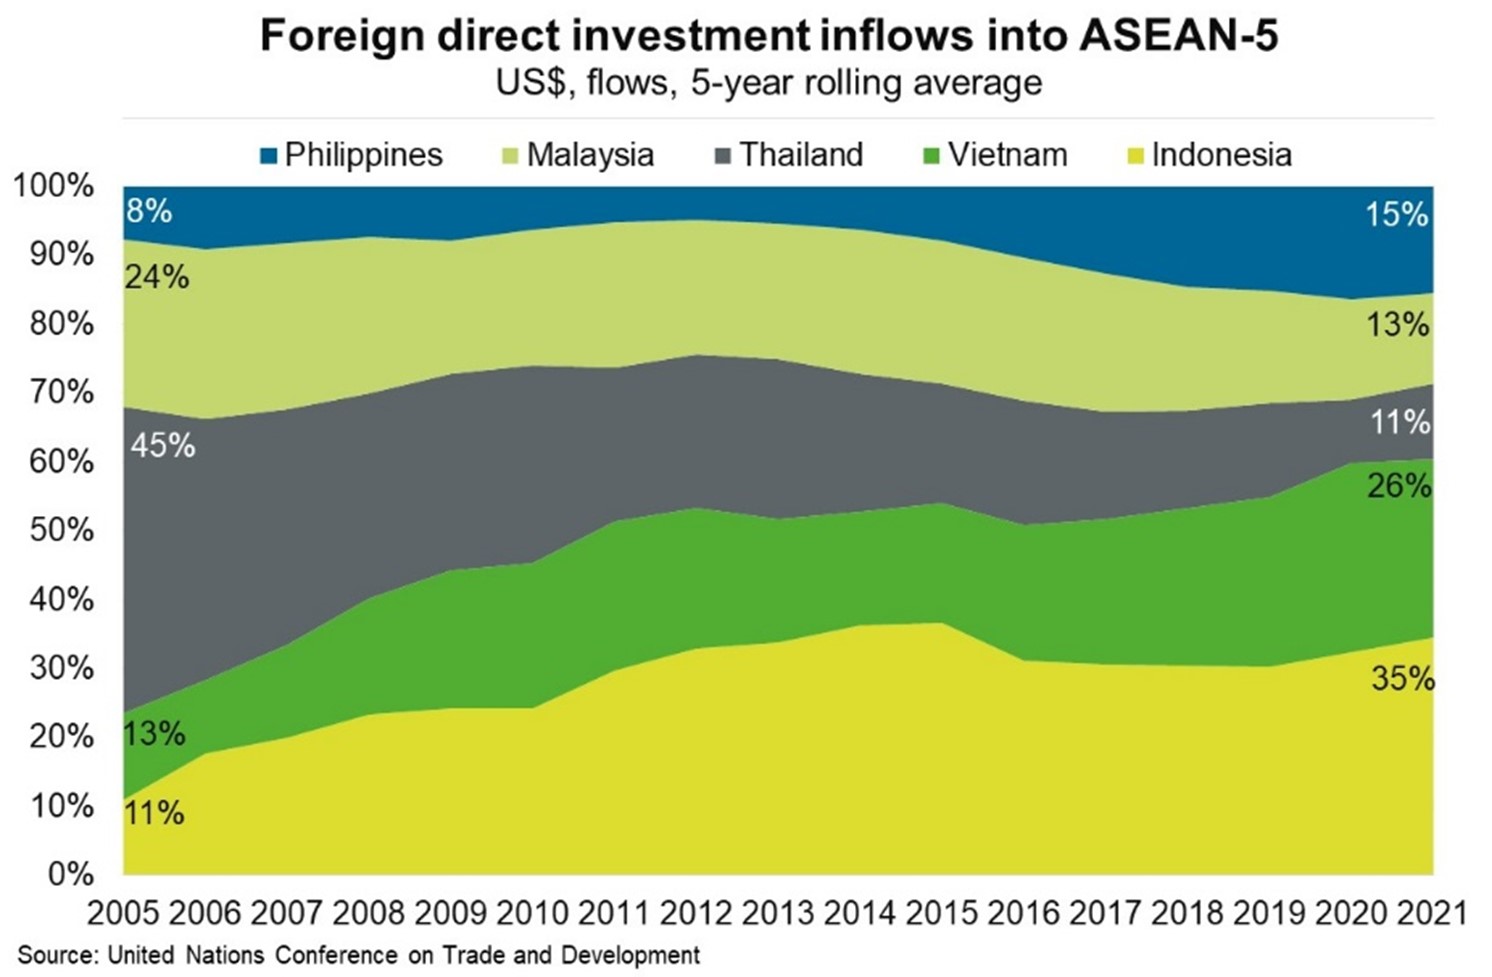 Foreign direct investment inflows in ASEAN-5